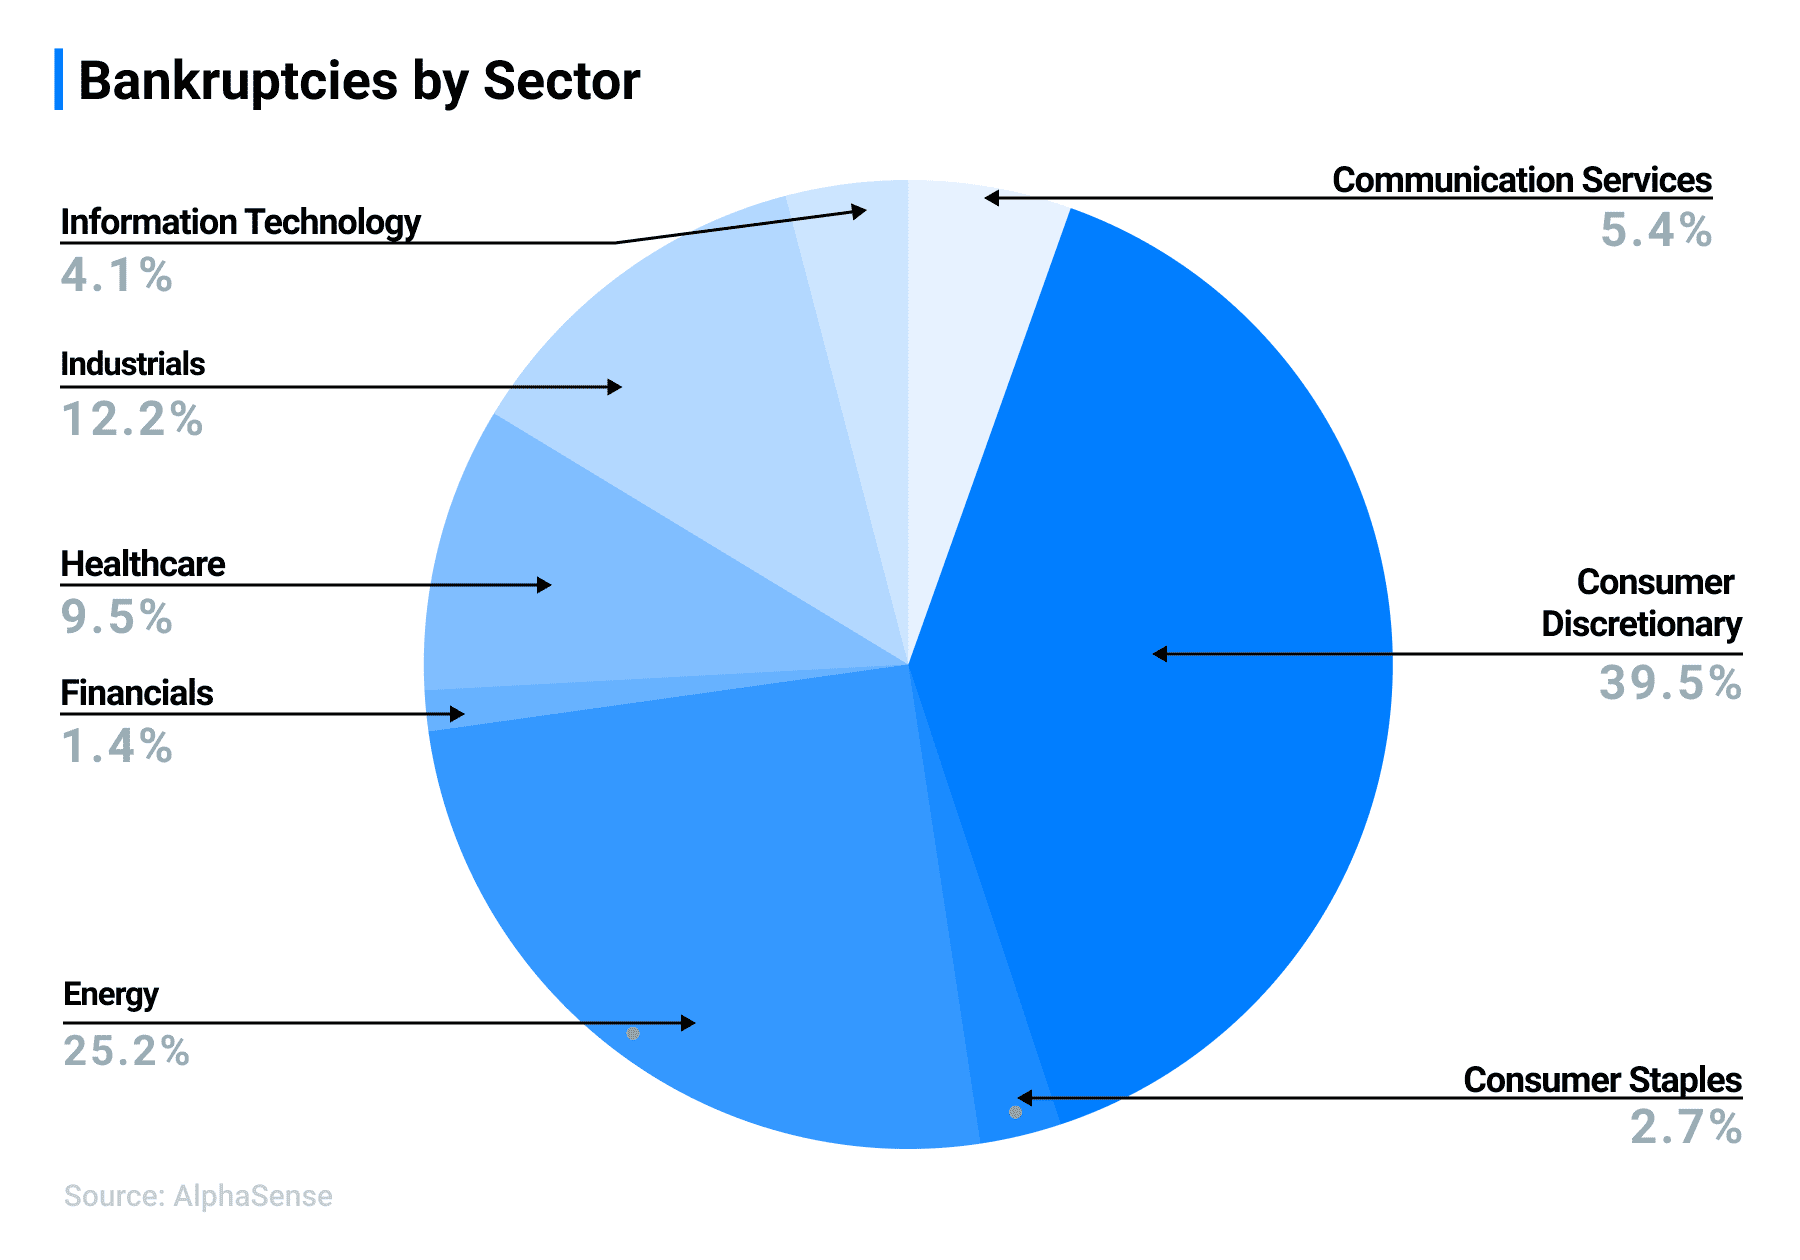 Bankruptcies20by20Sector20 11122020